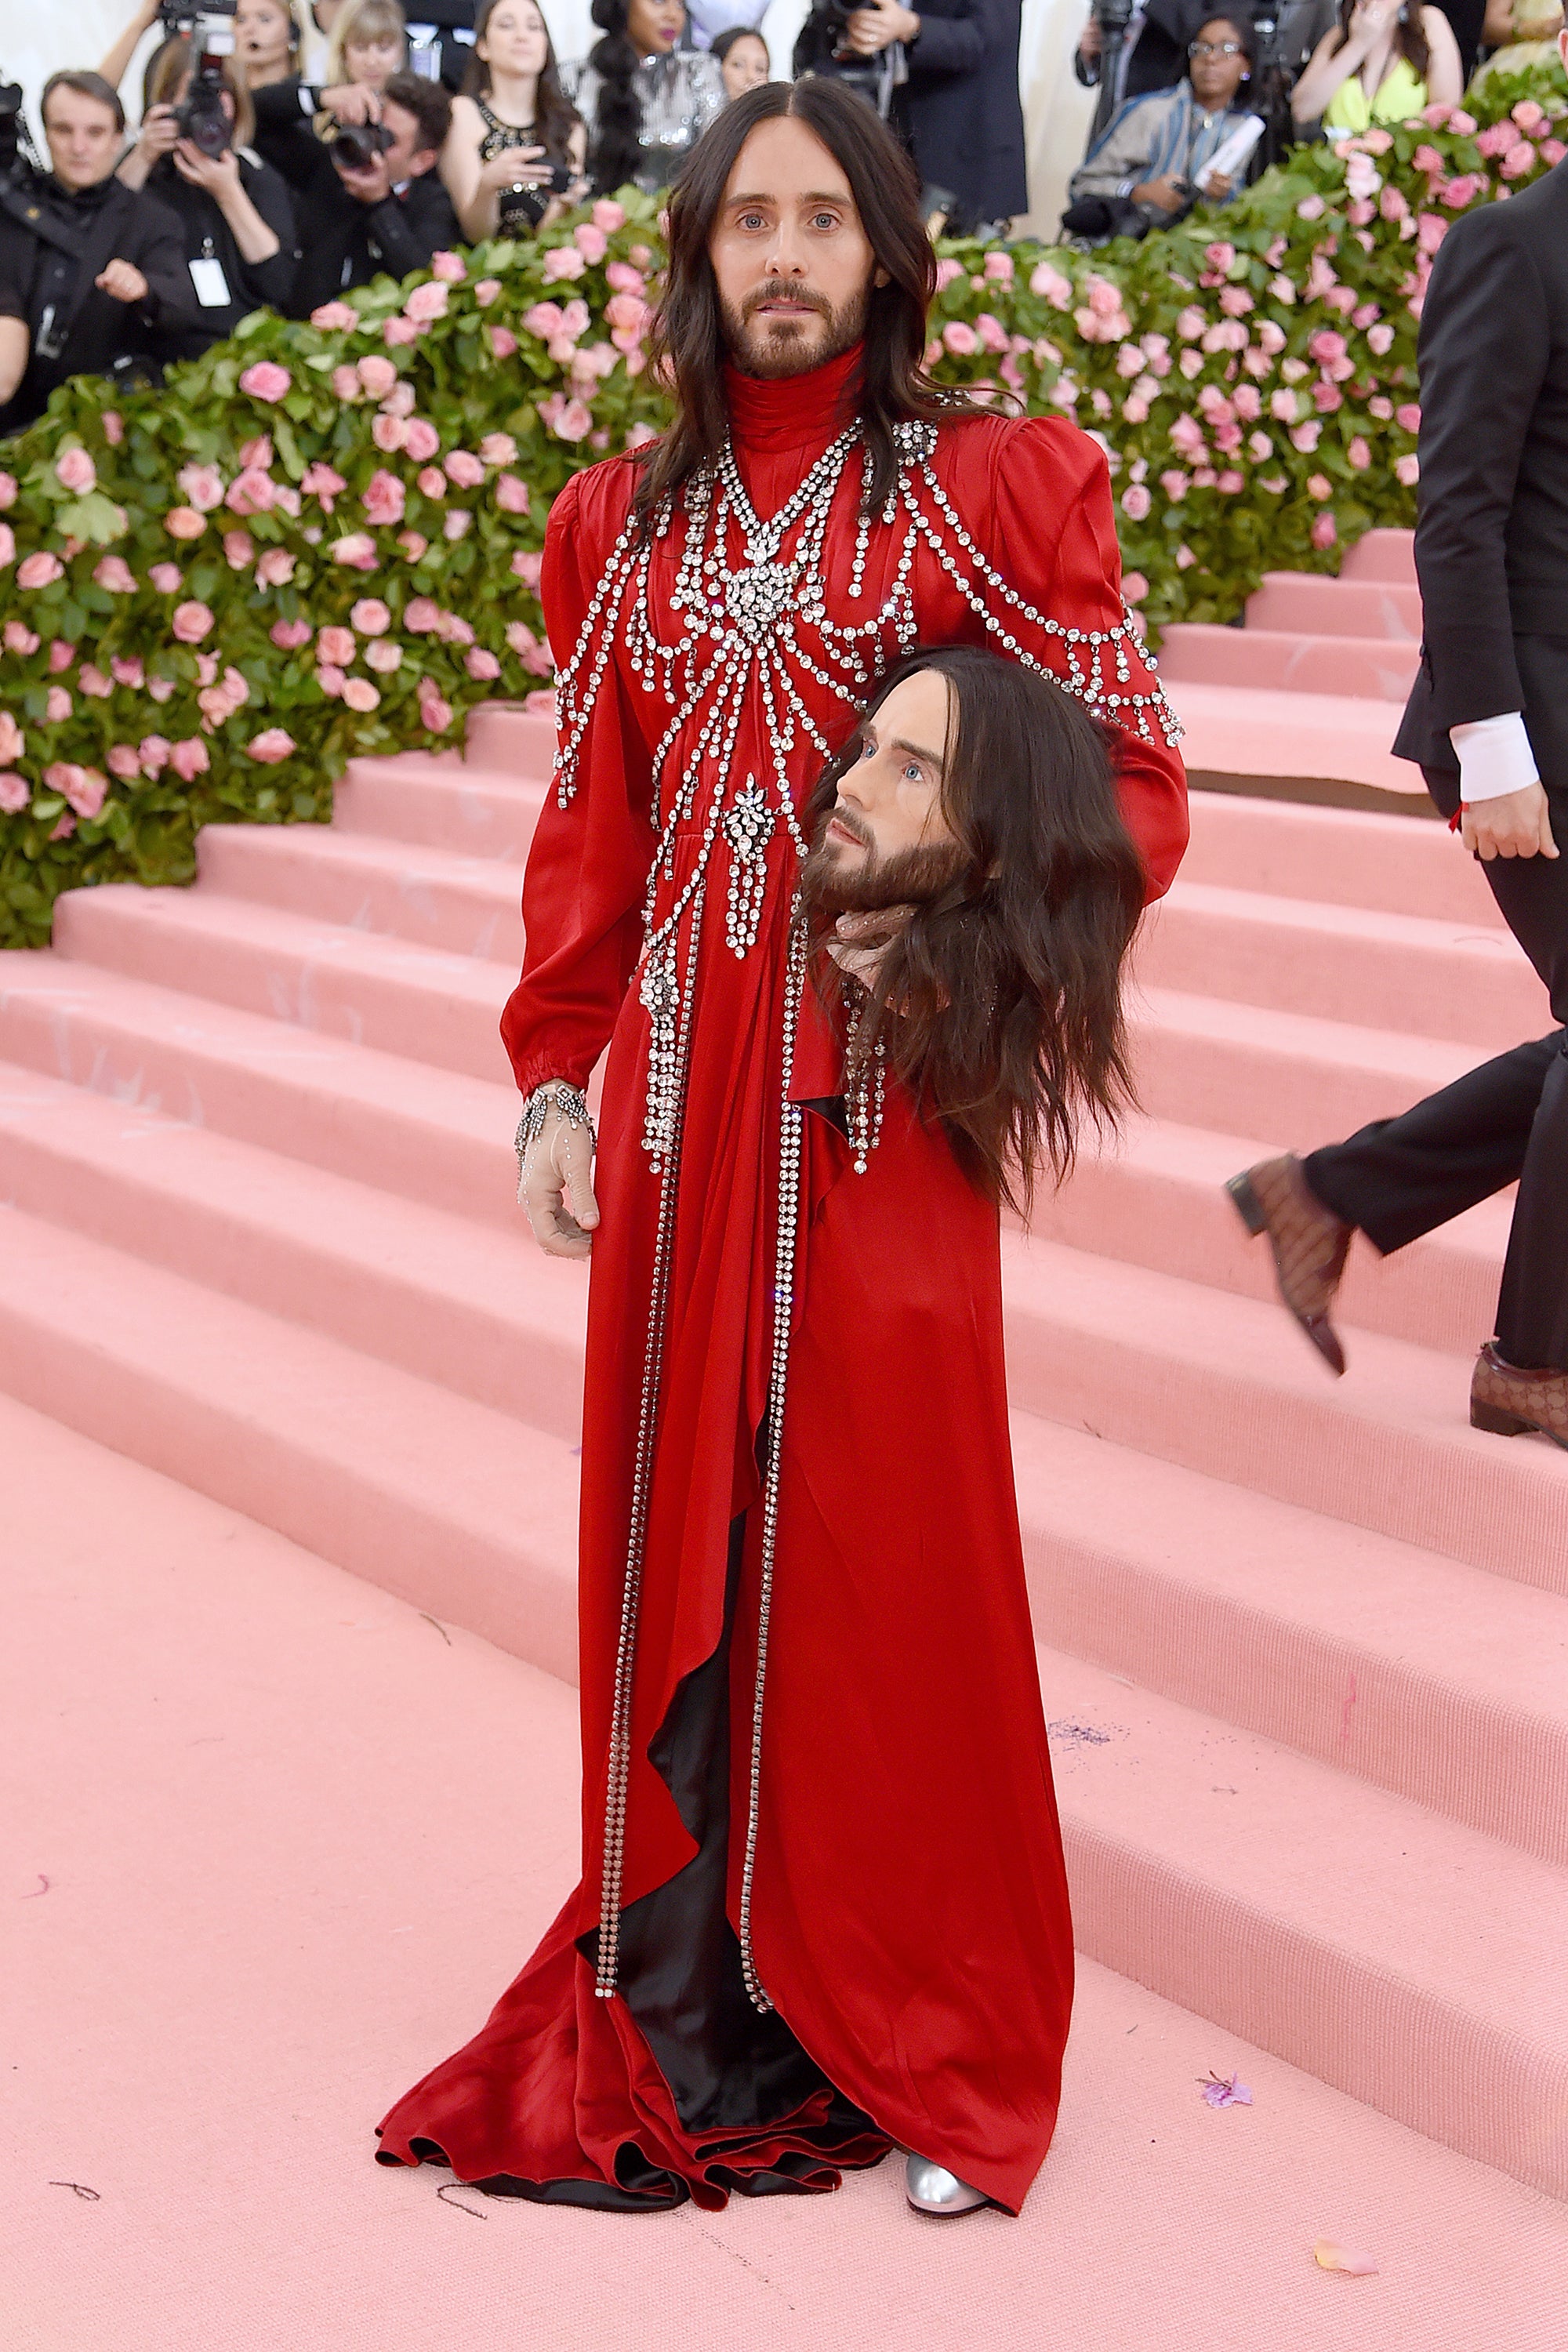 Photos from The Best Met Gala Looks Ever